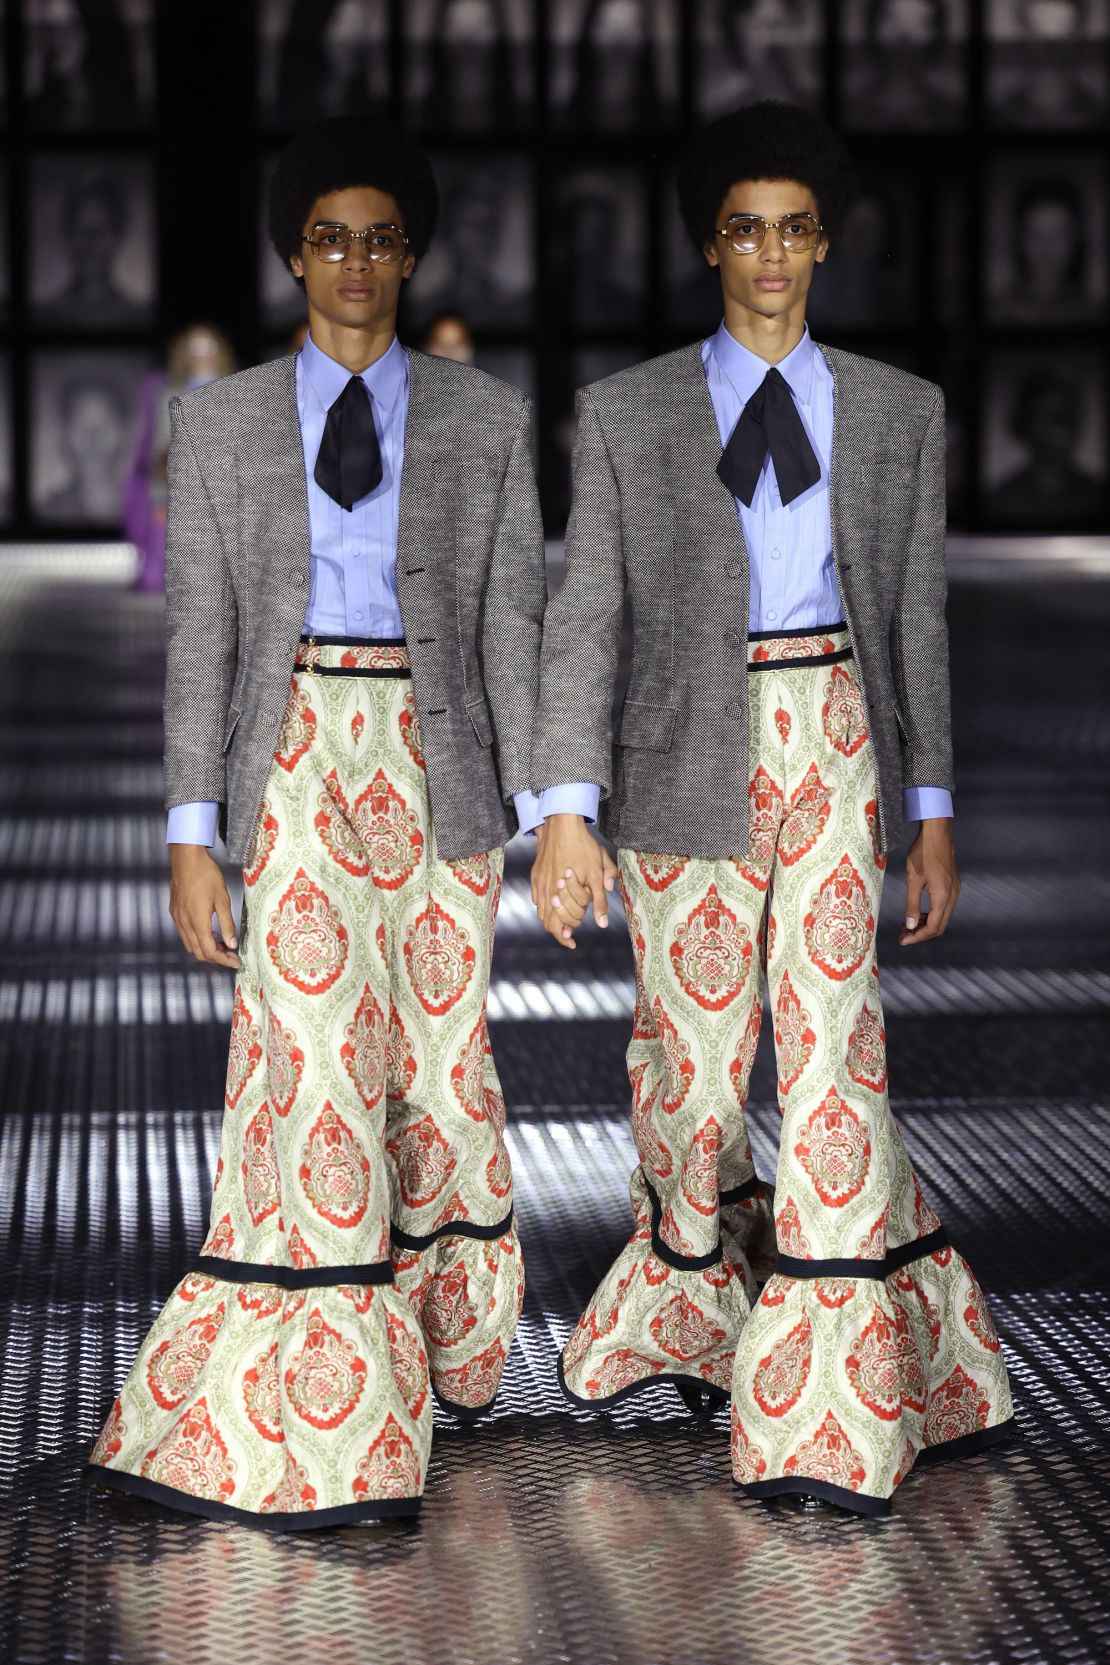 Models walk the runway at Milan Fashion Week in Michele's last major show for Gucci.